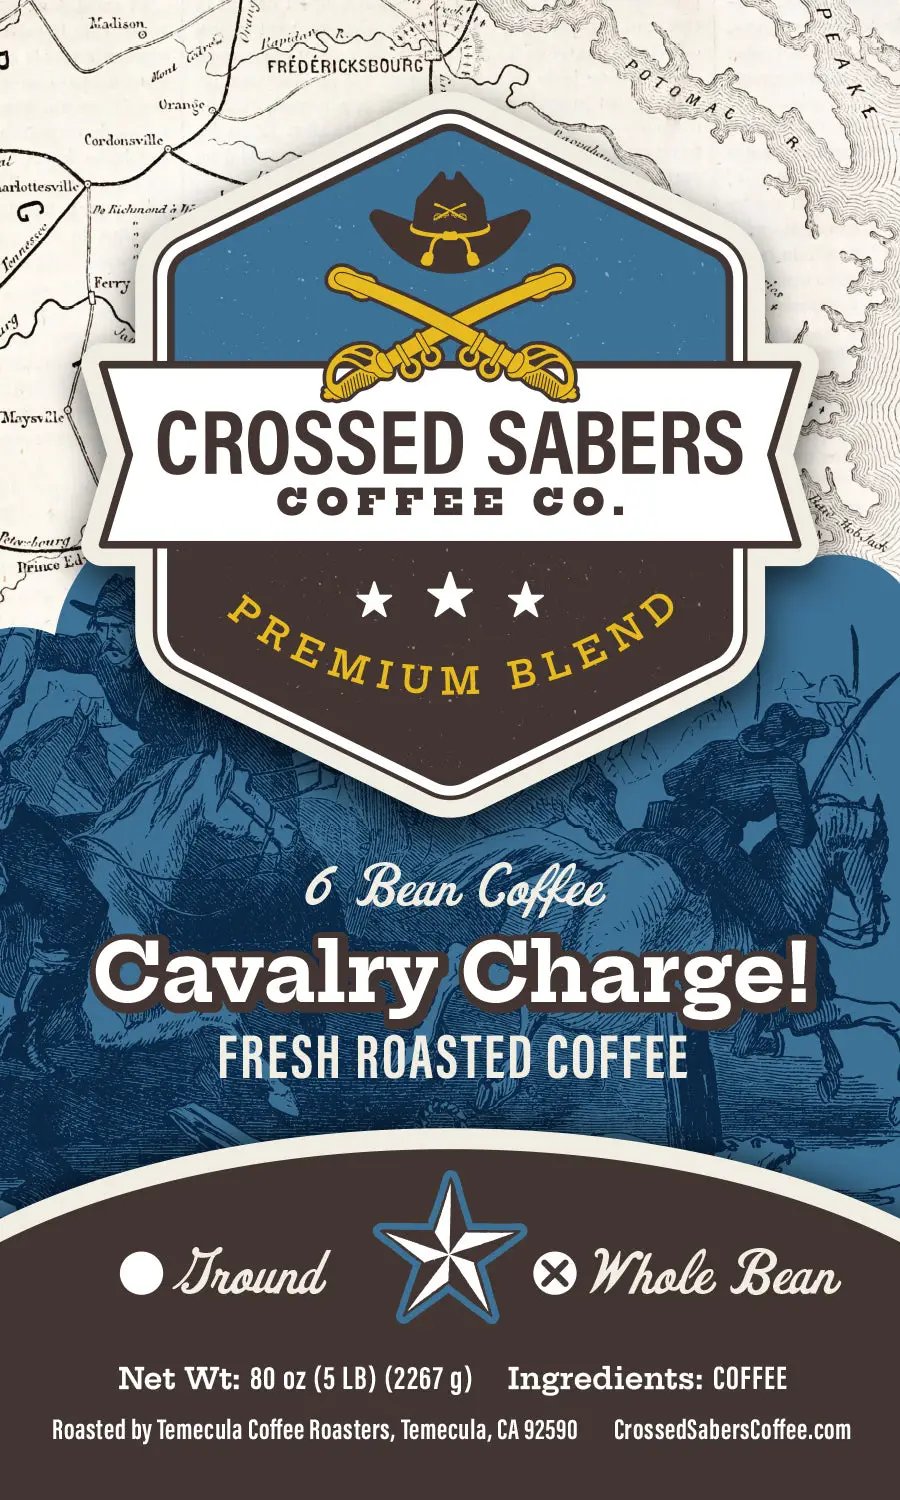 Crossed Sabers Coffee Cavalry Charge! 5lb Whole Bean